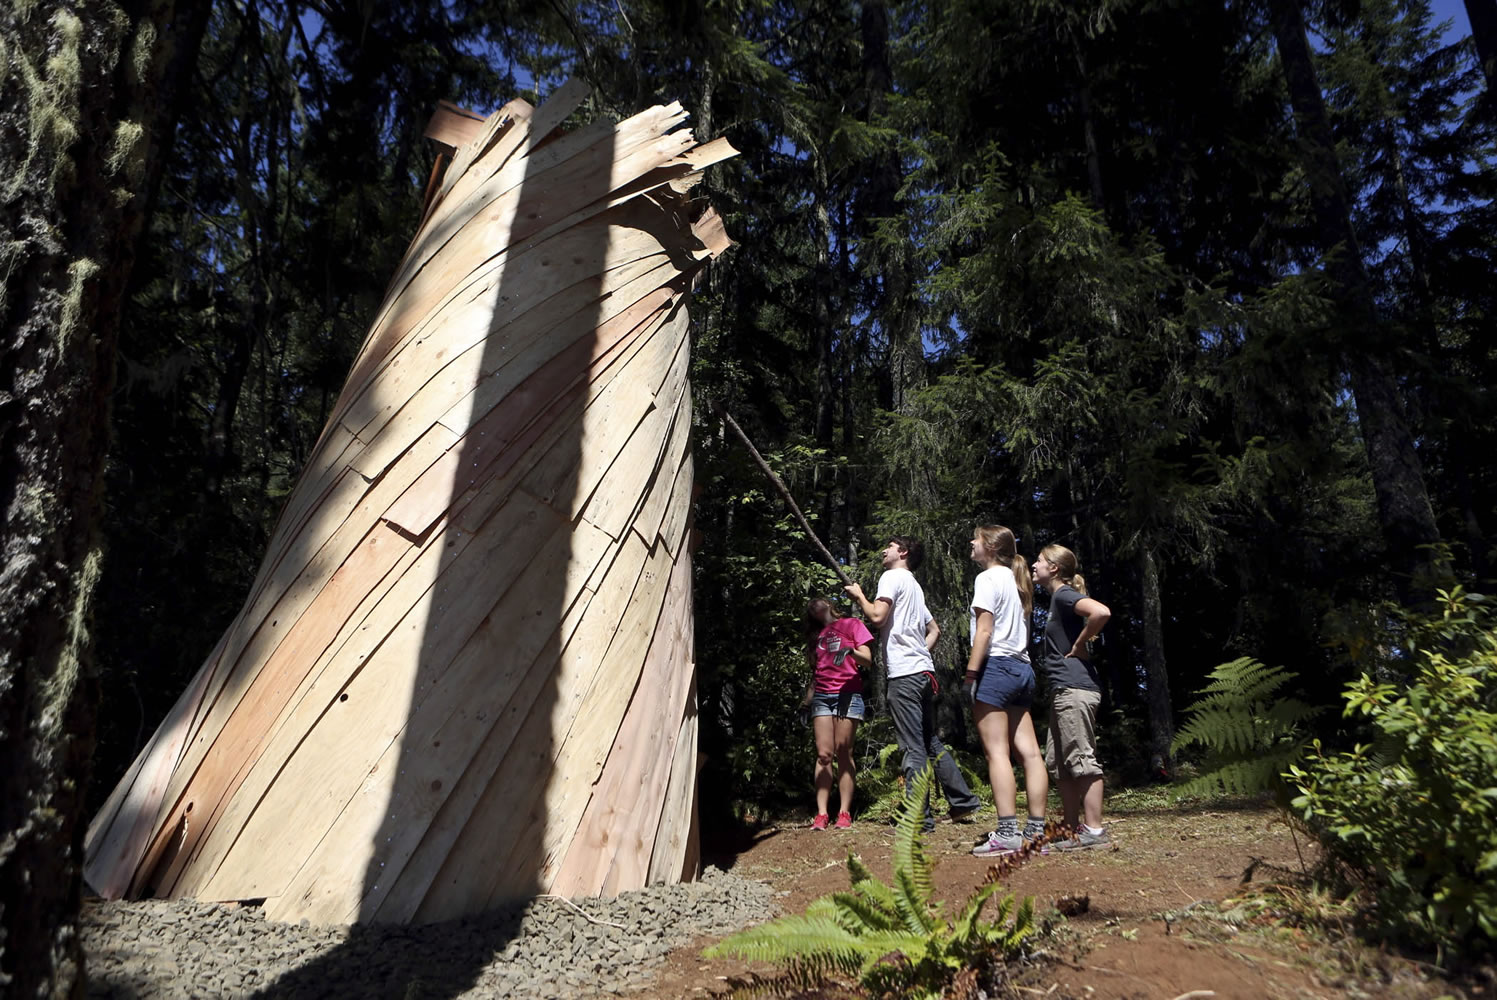 Sonja Ellicott, from left, Caleb Rich, Stephanie Johnson and Courtney Ferris fix some of the thin fir planks surrounding the outside of the massive pinhole camera their class built in the woods Aug.